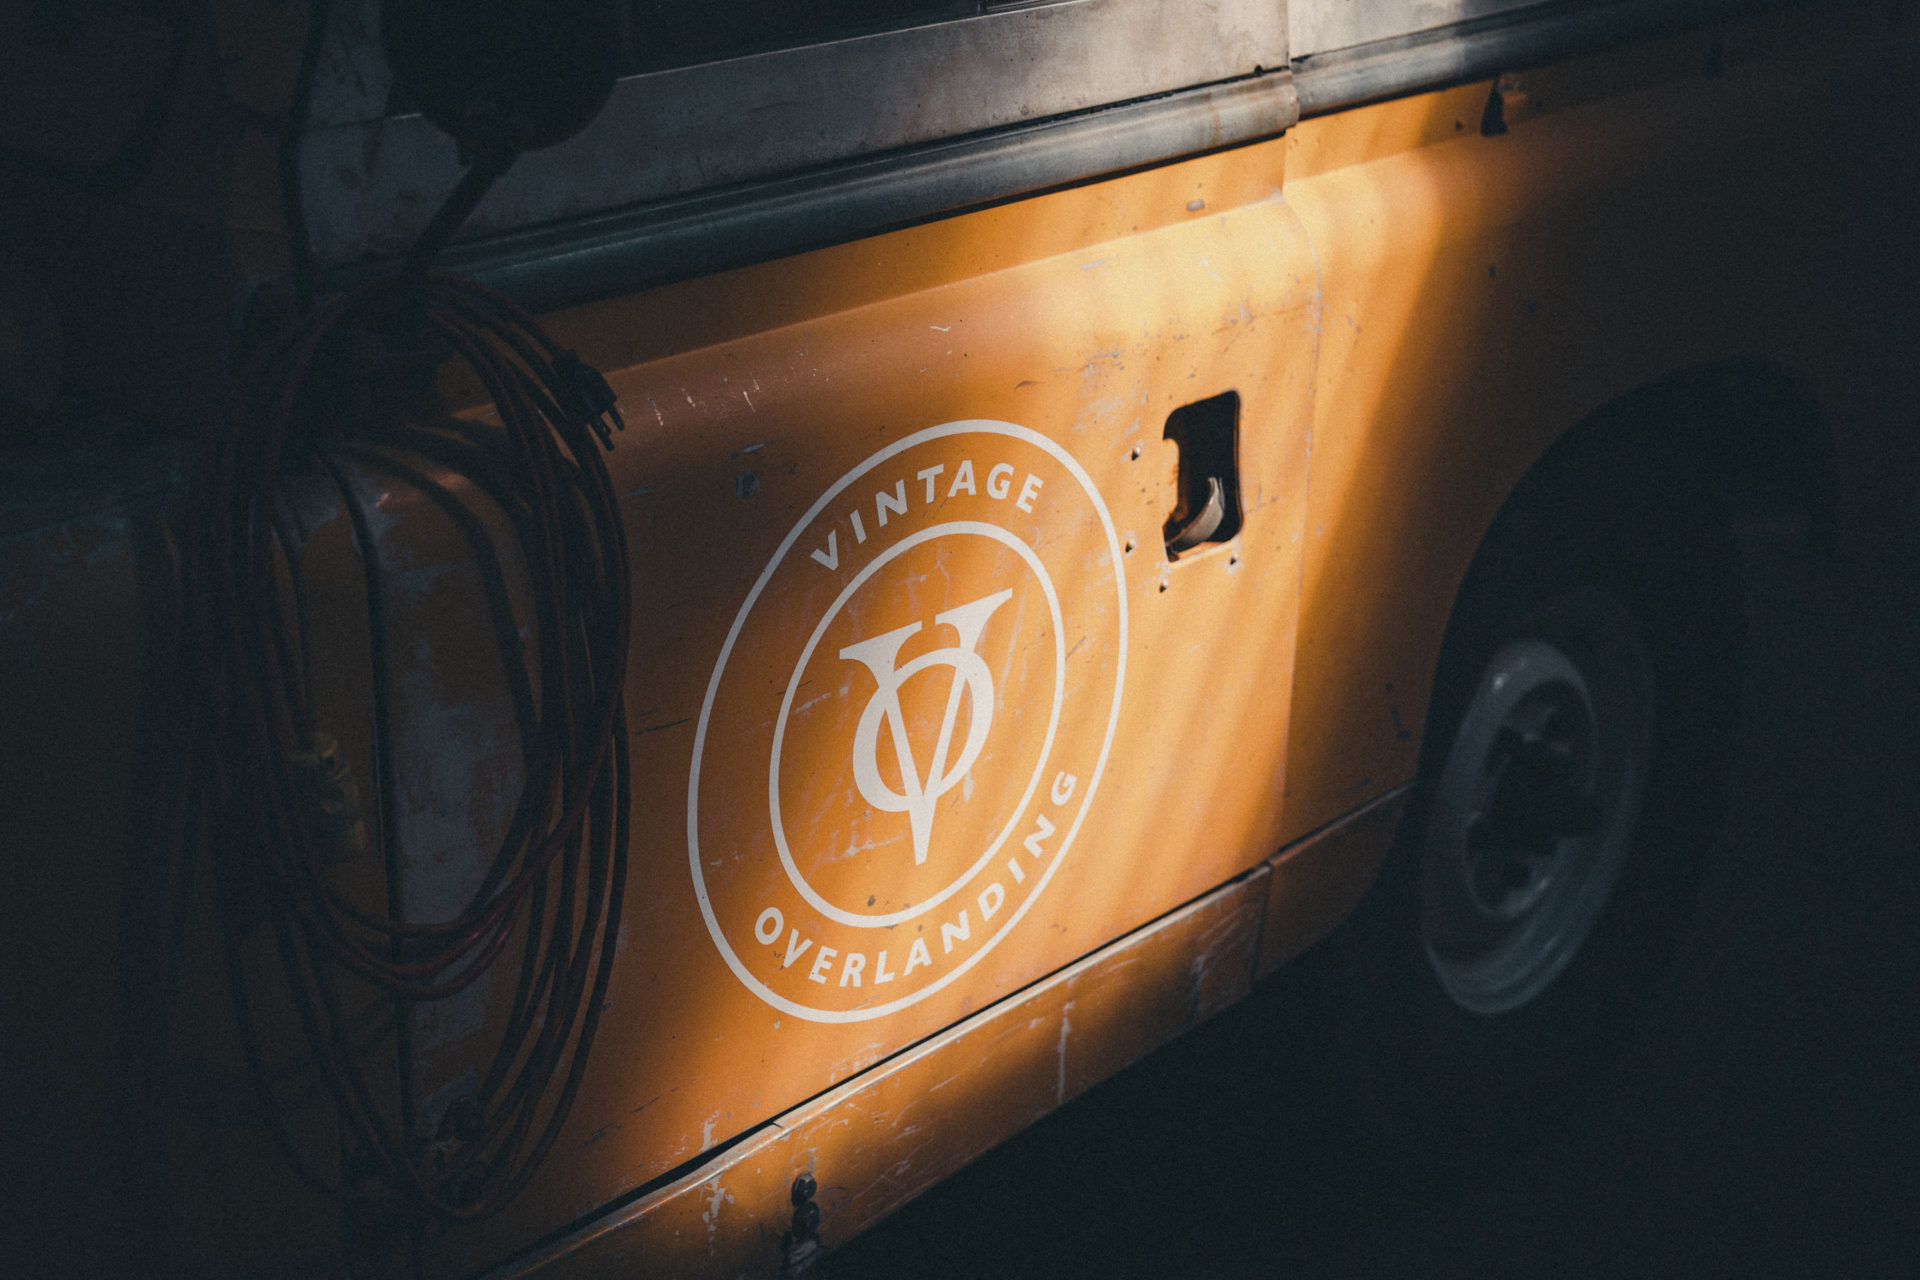 Close-up commercial photography of a Vintage Outfitting logo on the side of an orange Land Rover in Chattanooga, TN.